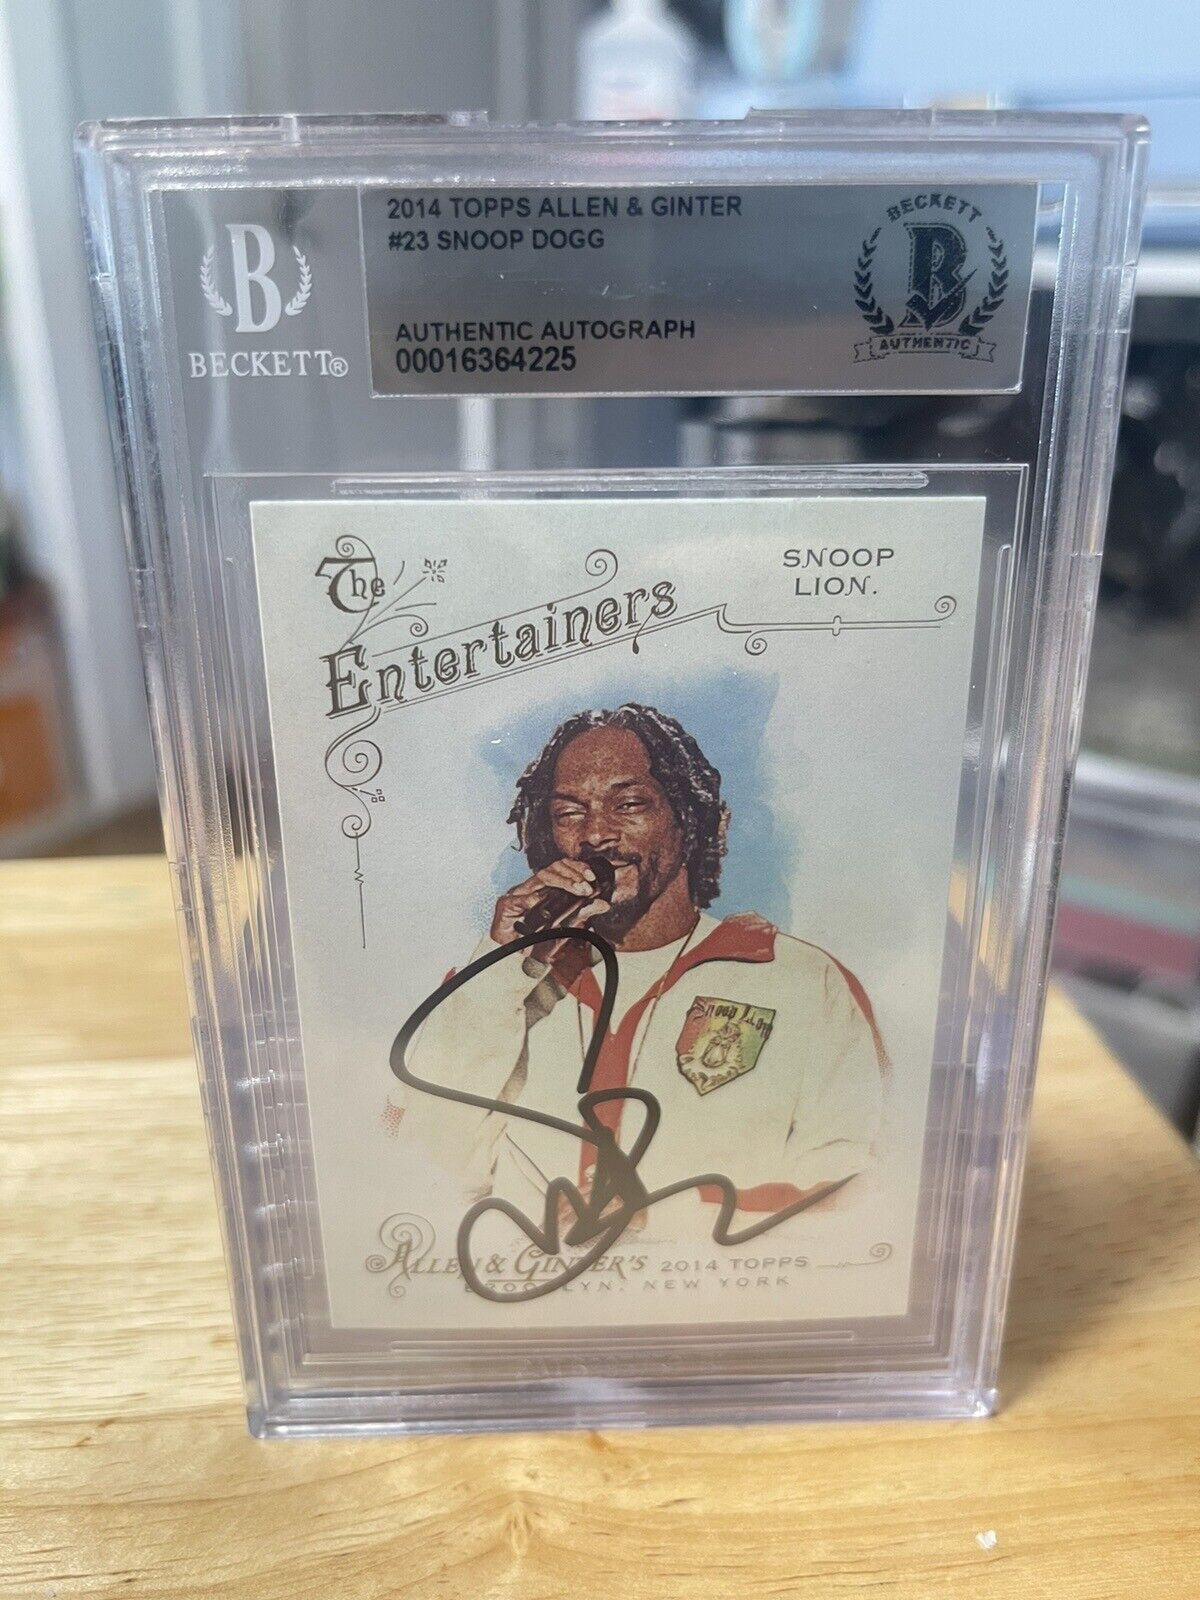 SNOOP DOGG LION SIGNED 2014 ALLEN & GINTER #23 AUTO SIGNED BECKETT BGS SLABBED F